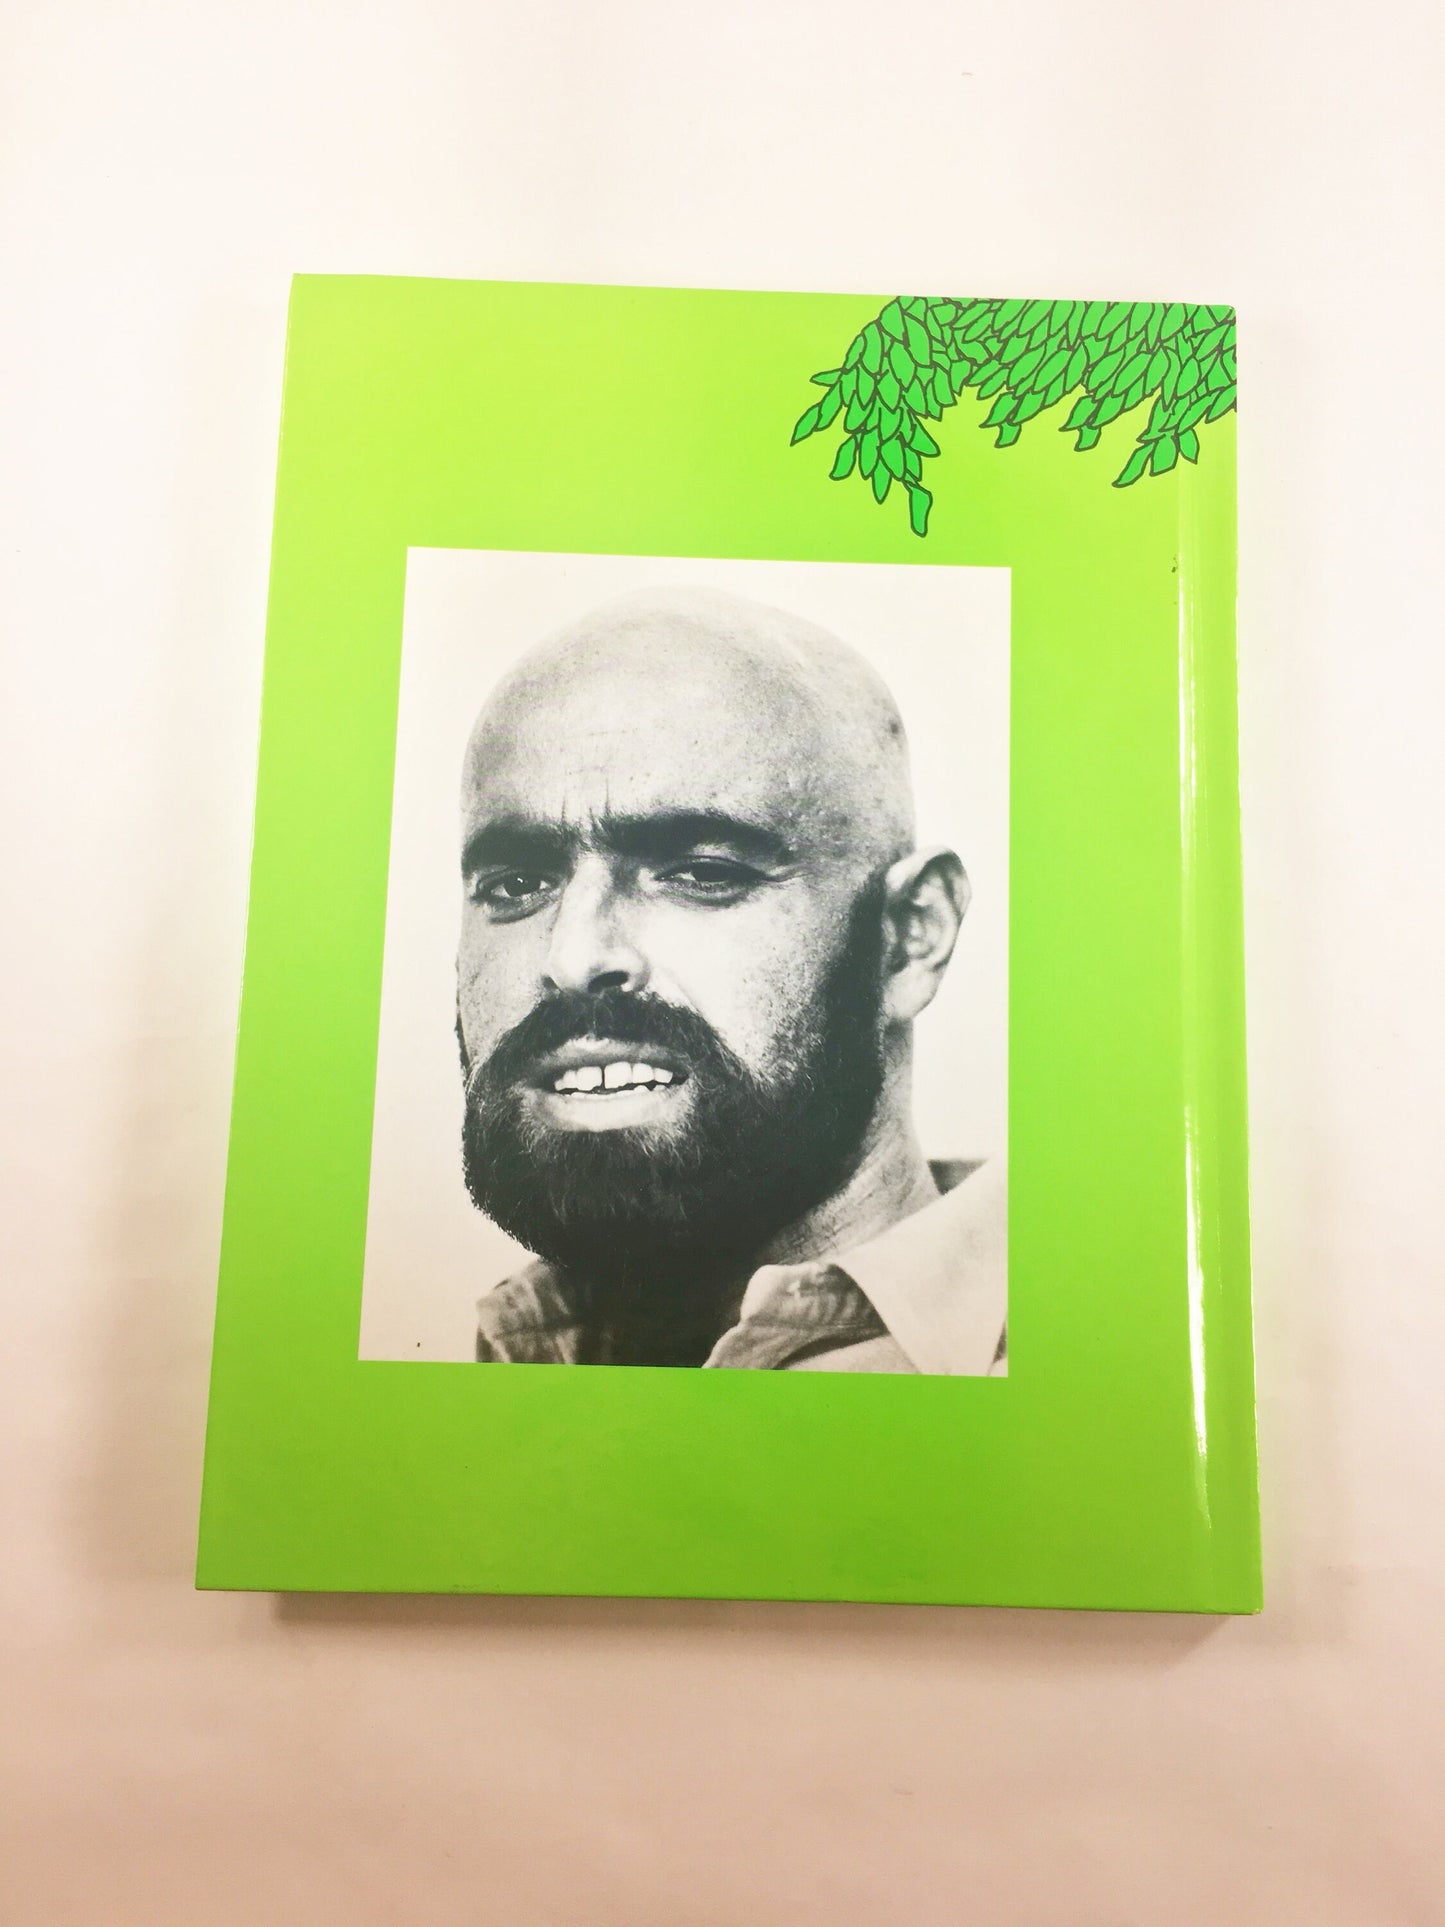 Giving Tree by Shel Silverstein. Vintage book with dust jacket. Charming Story of Selfless Acts of kindness. New baby gift. Green book decor